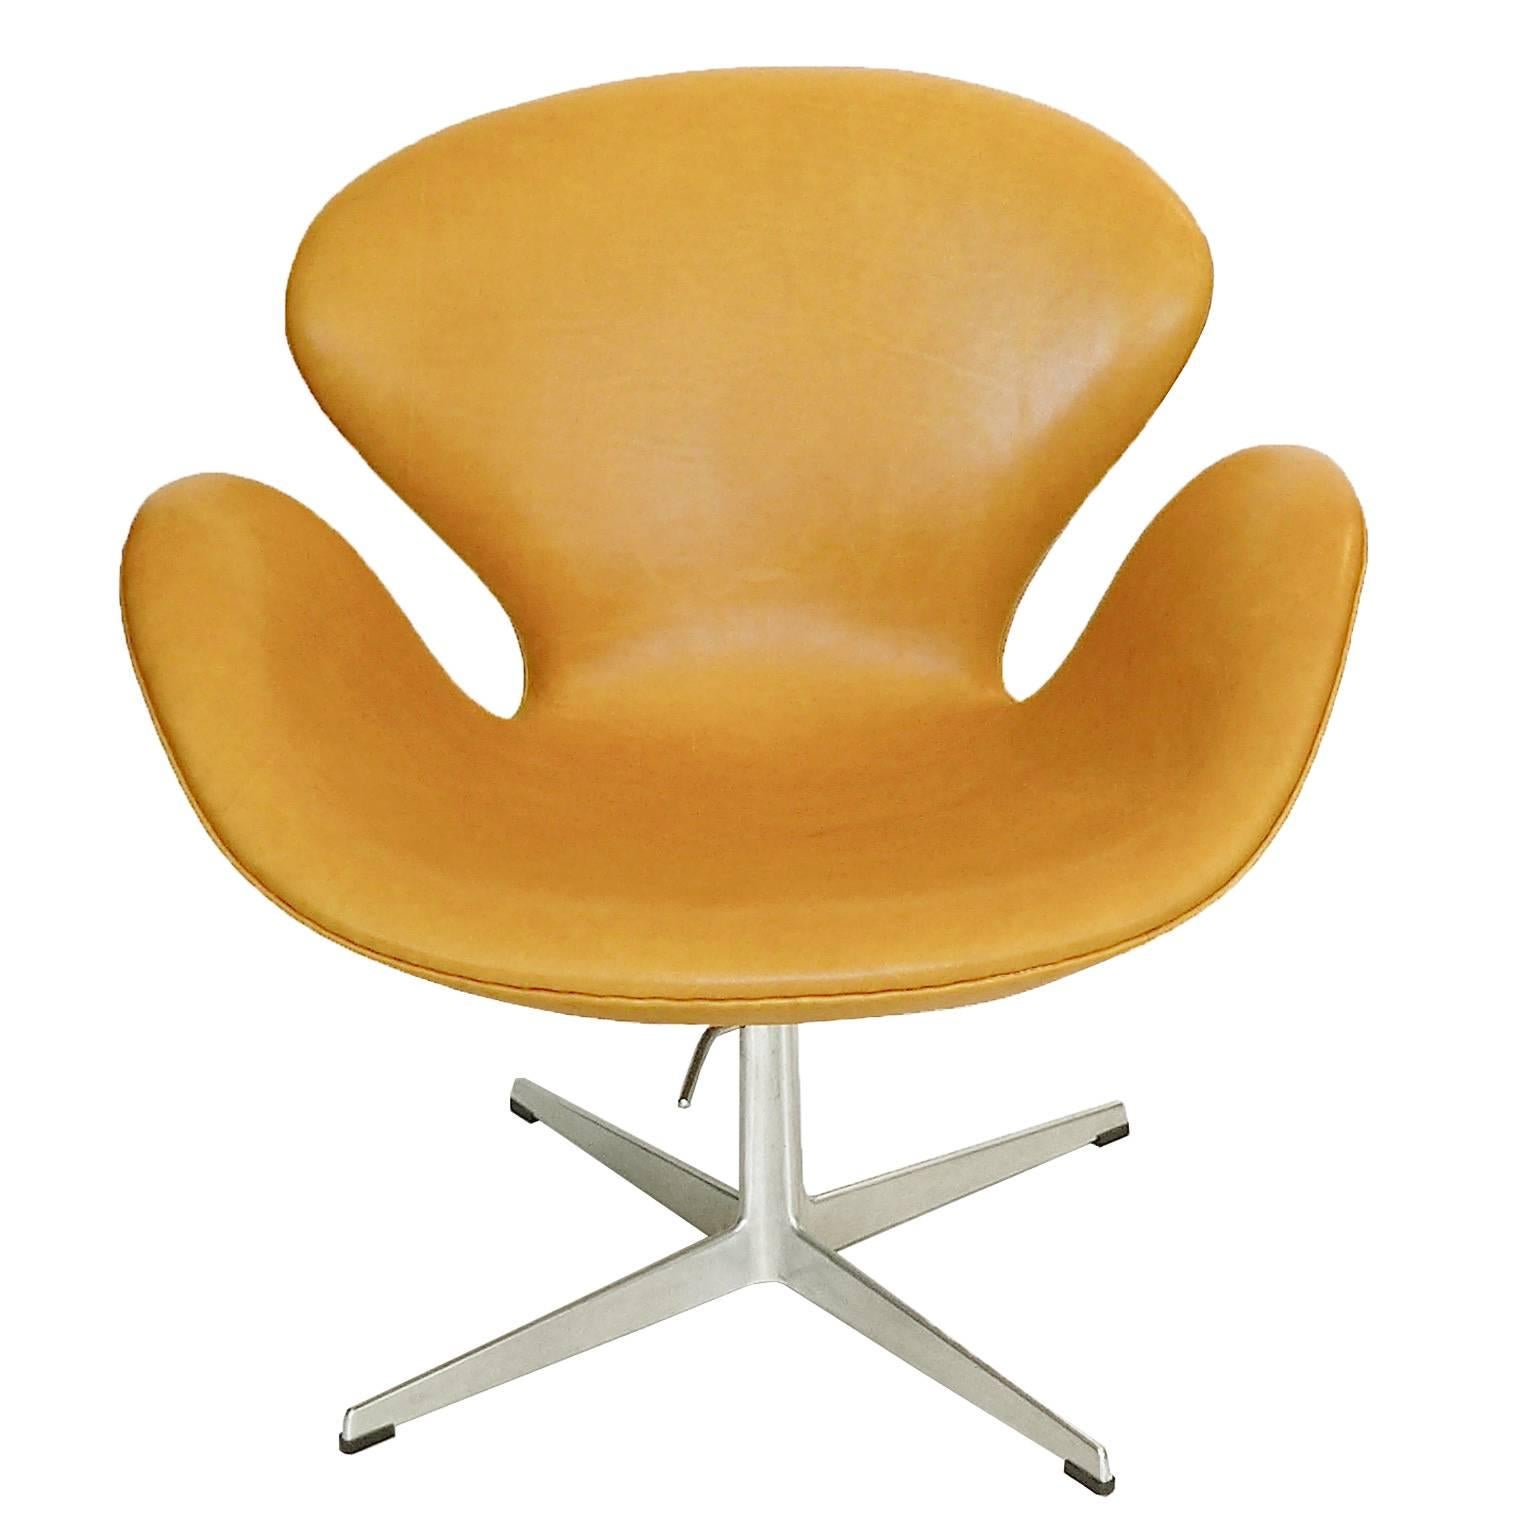 Mid-Century Modern Early Rare Adjustable Swan Chair by Arne Jacobsen in Golden Tan Leather For Sale